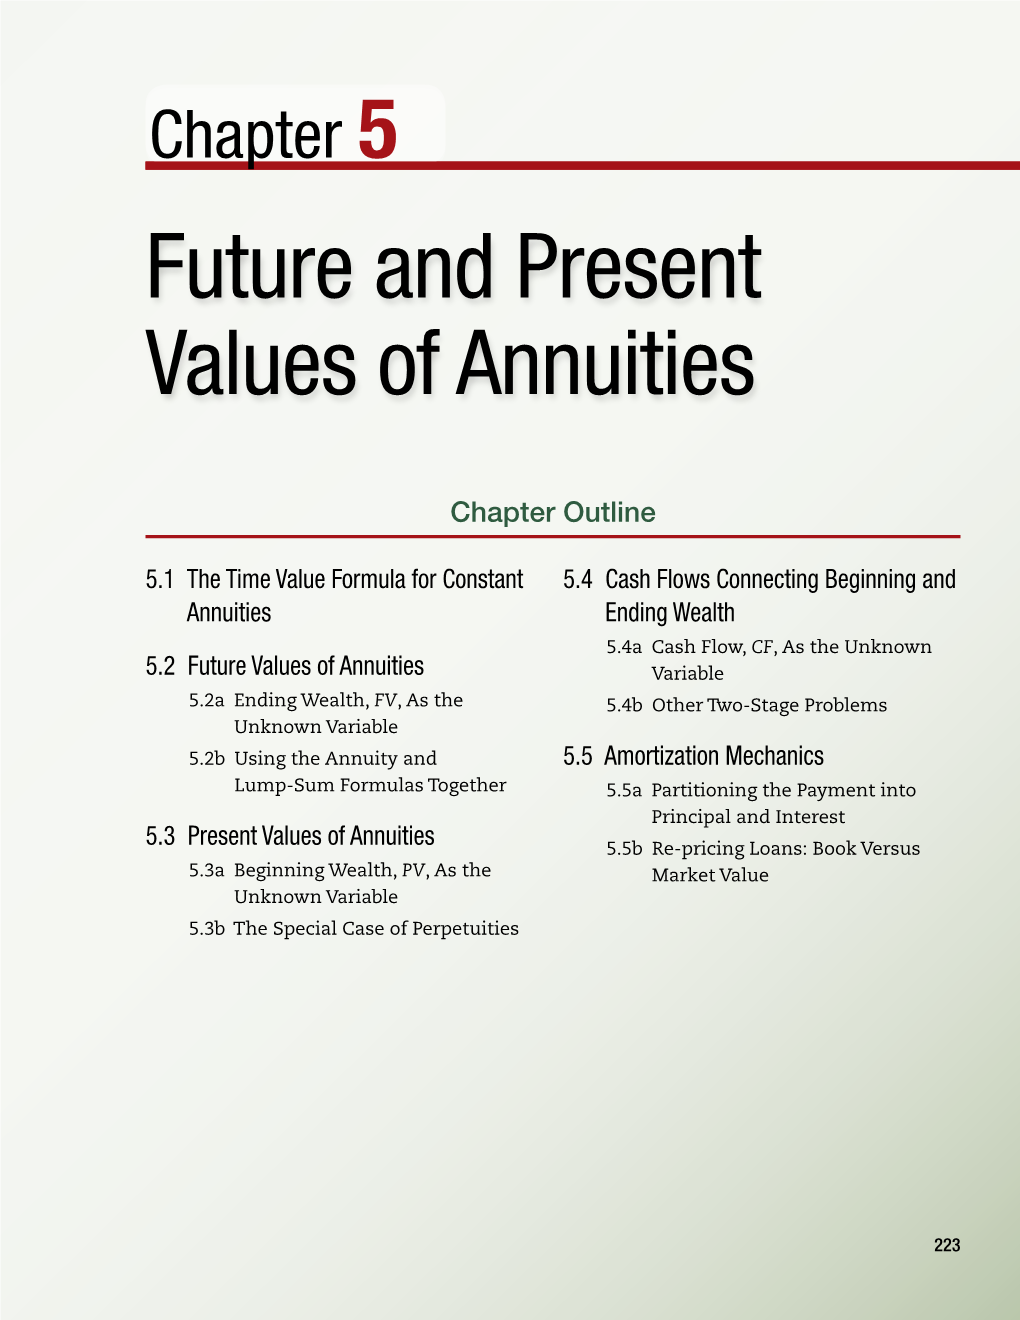 Future and Present Values of Annuities